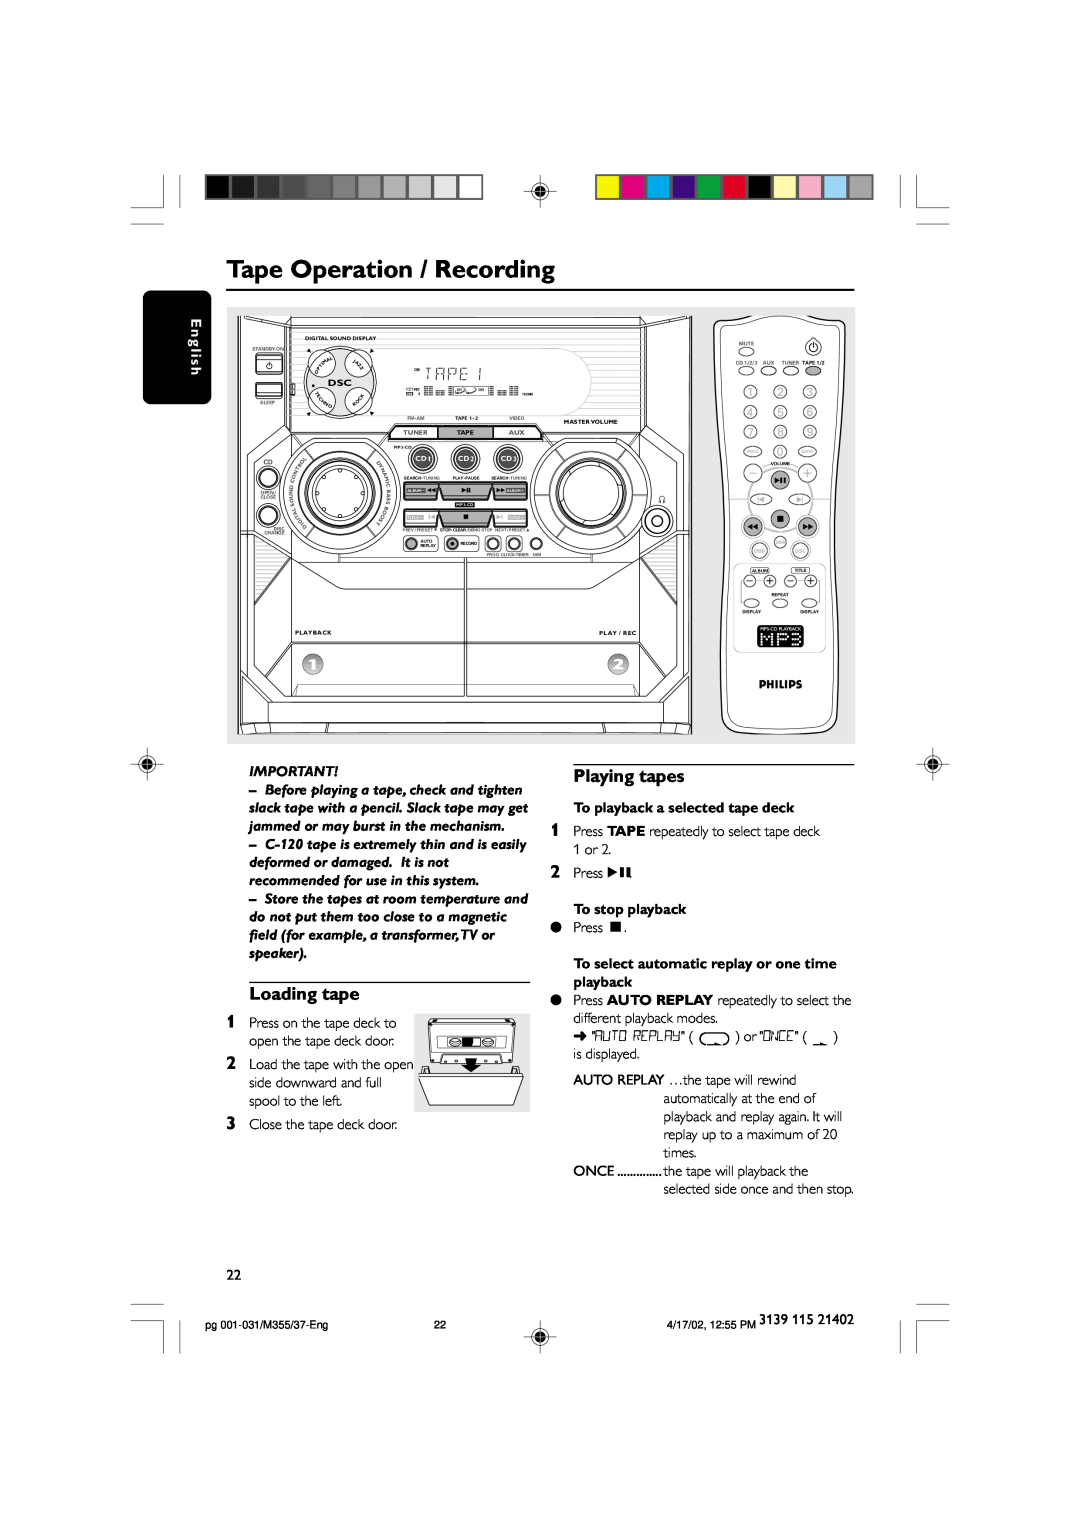 Philips M355 Tape Operation / Recording, Loading tape, Playing tapes, To playback a selected tape deck, To stop playback 